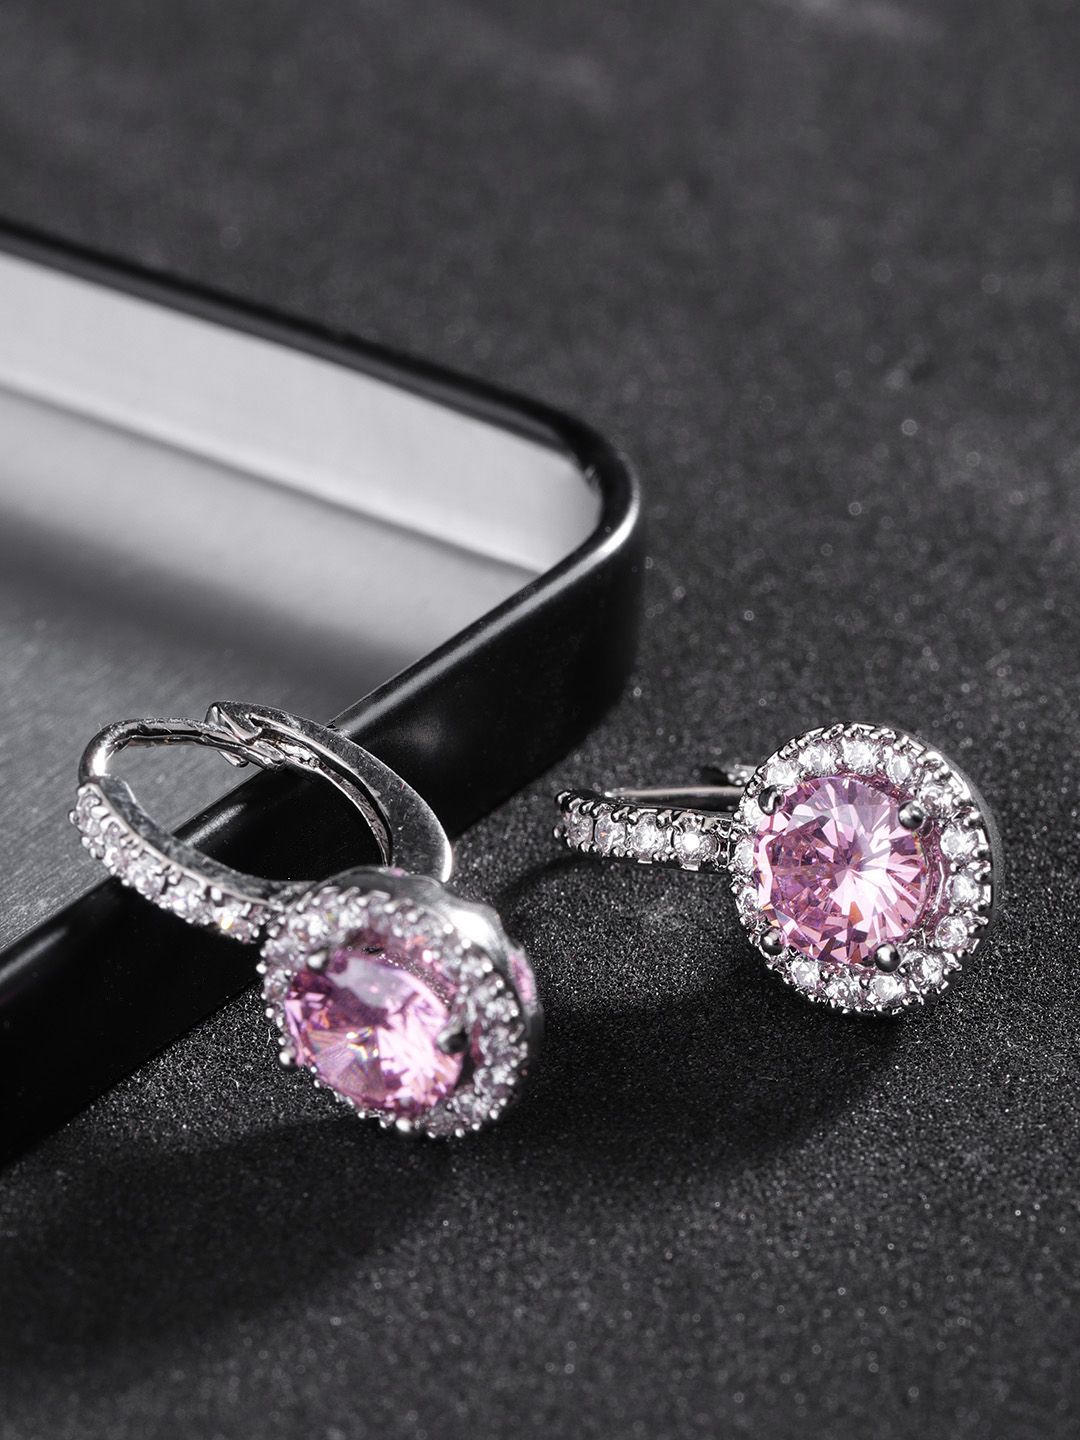 Carlton London Silver-Toned & Pink Rhodium-Plated CZ Studded Circular Hoop Earrings Price in India